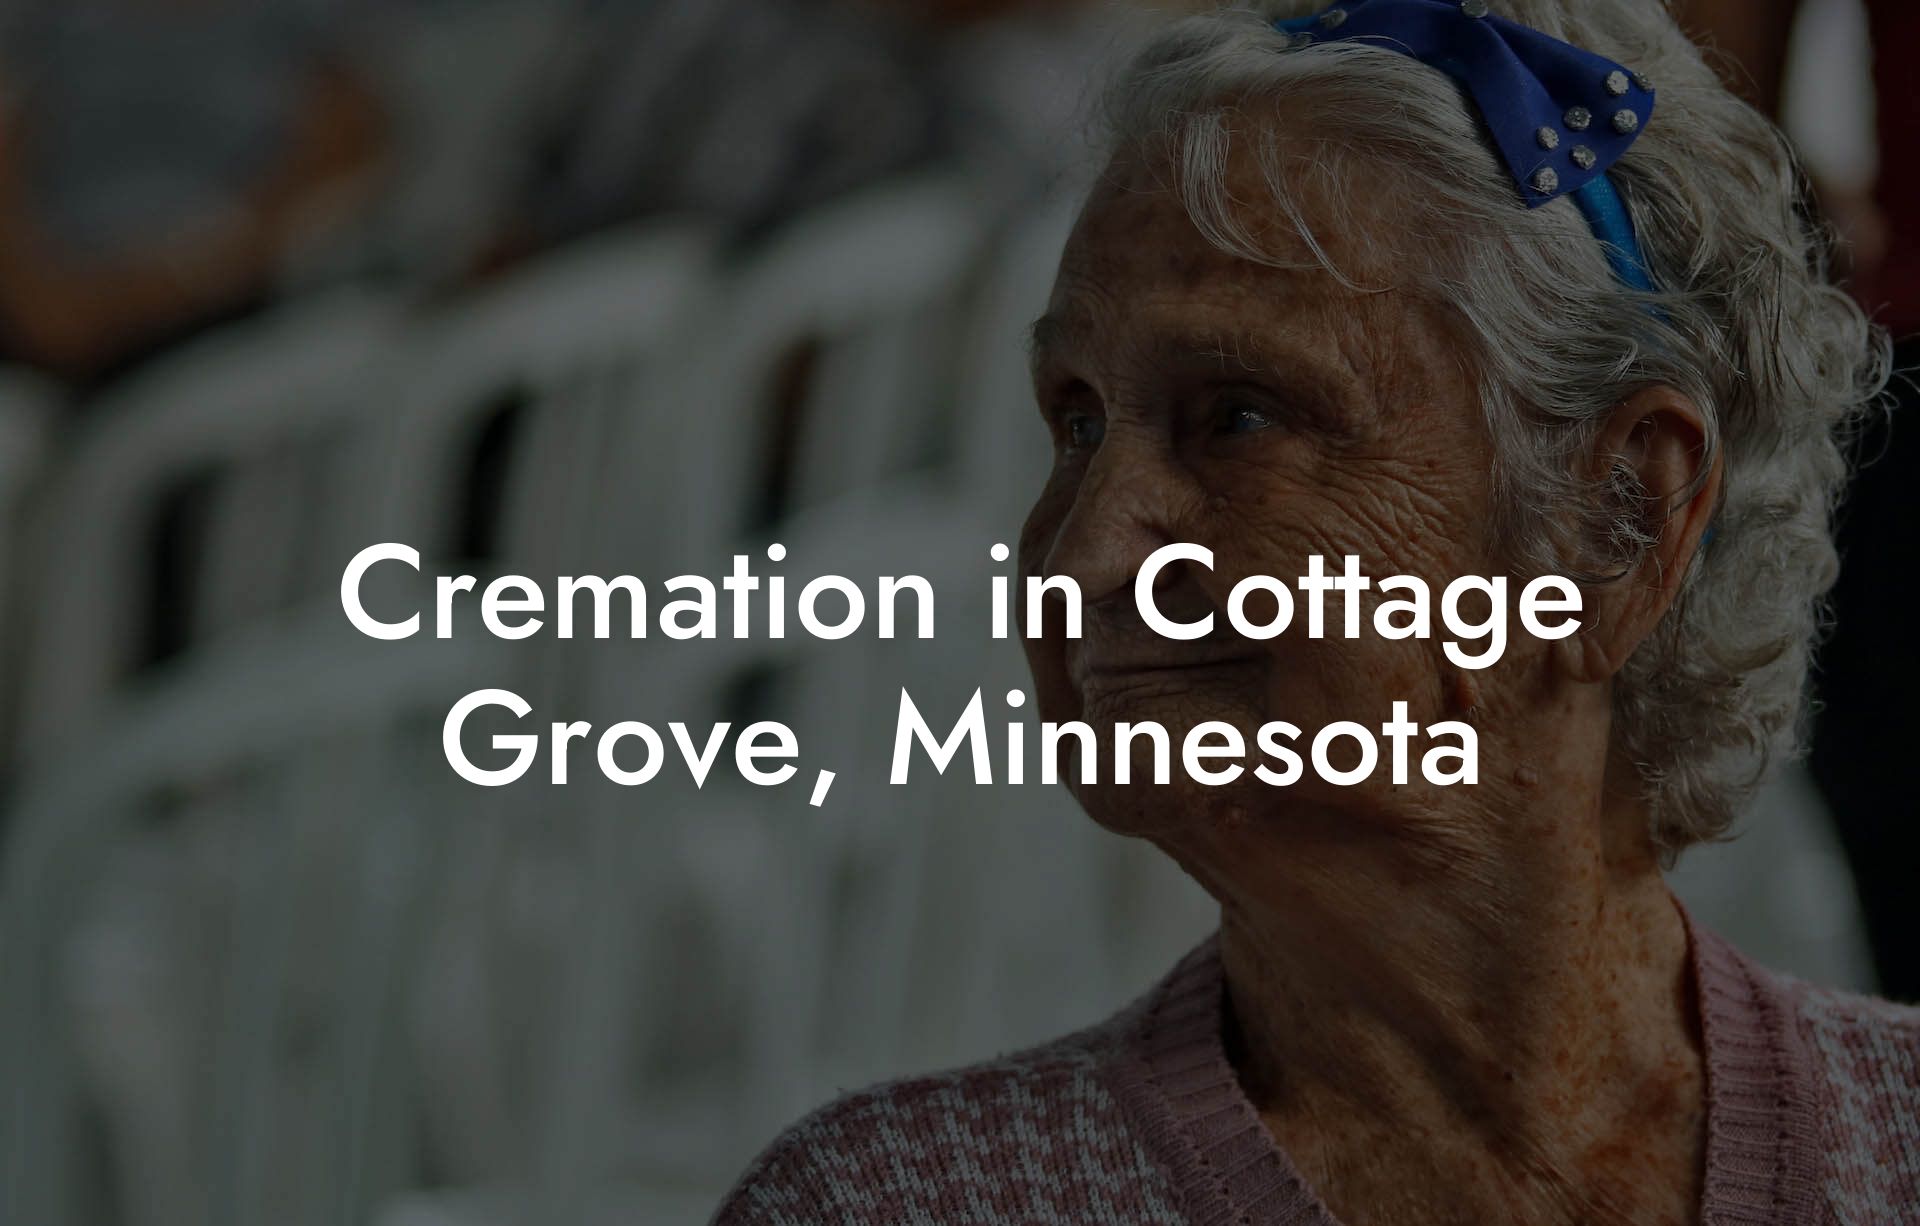 Cremation in Cottage Grove, Minnesota